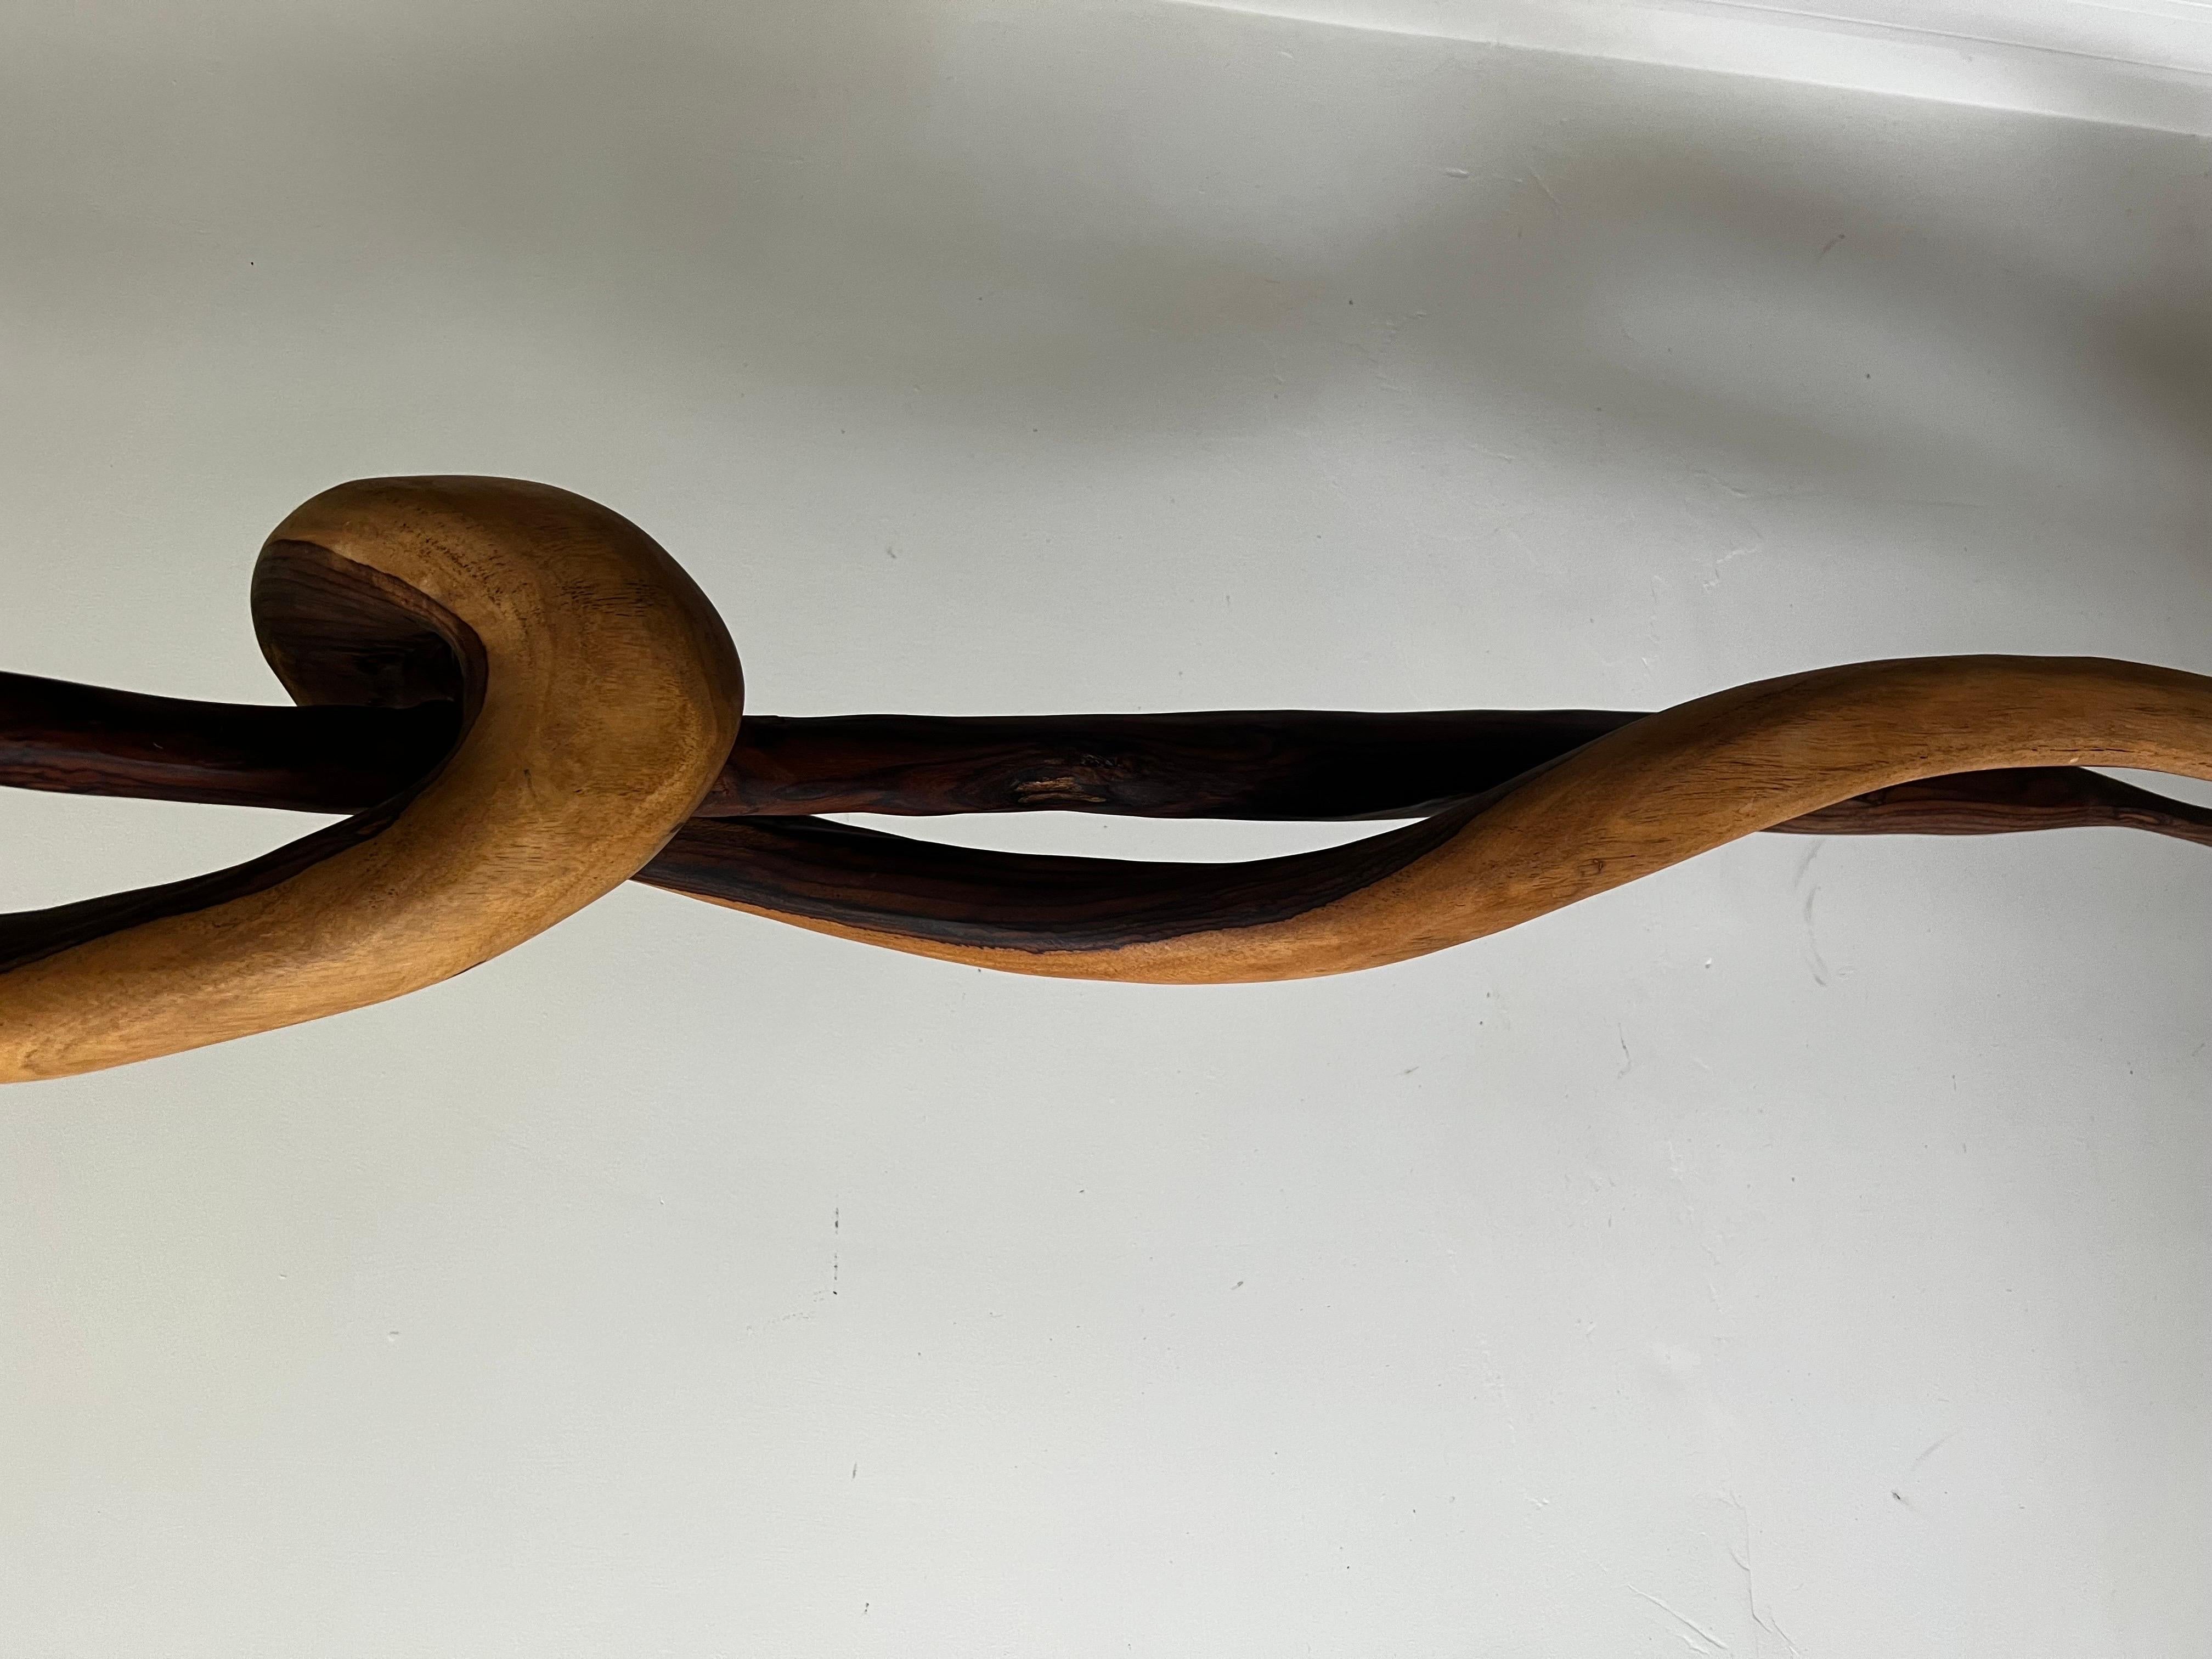 Minimalist Contemporary Sculpture in the style of Andrianna Shamaris.  Over 6 ft 2in in height.  
Black iron base 12 x 9.  
Very striking curves and detail in the smooth wood.  See images.  